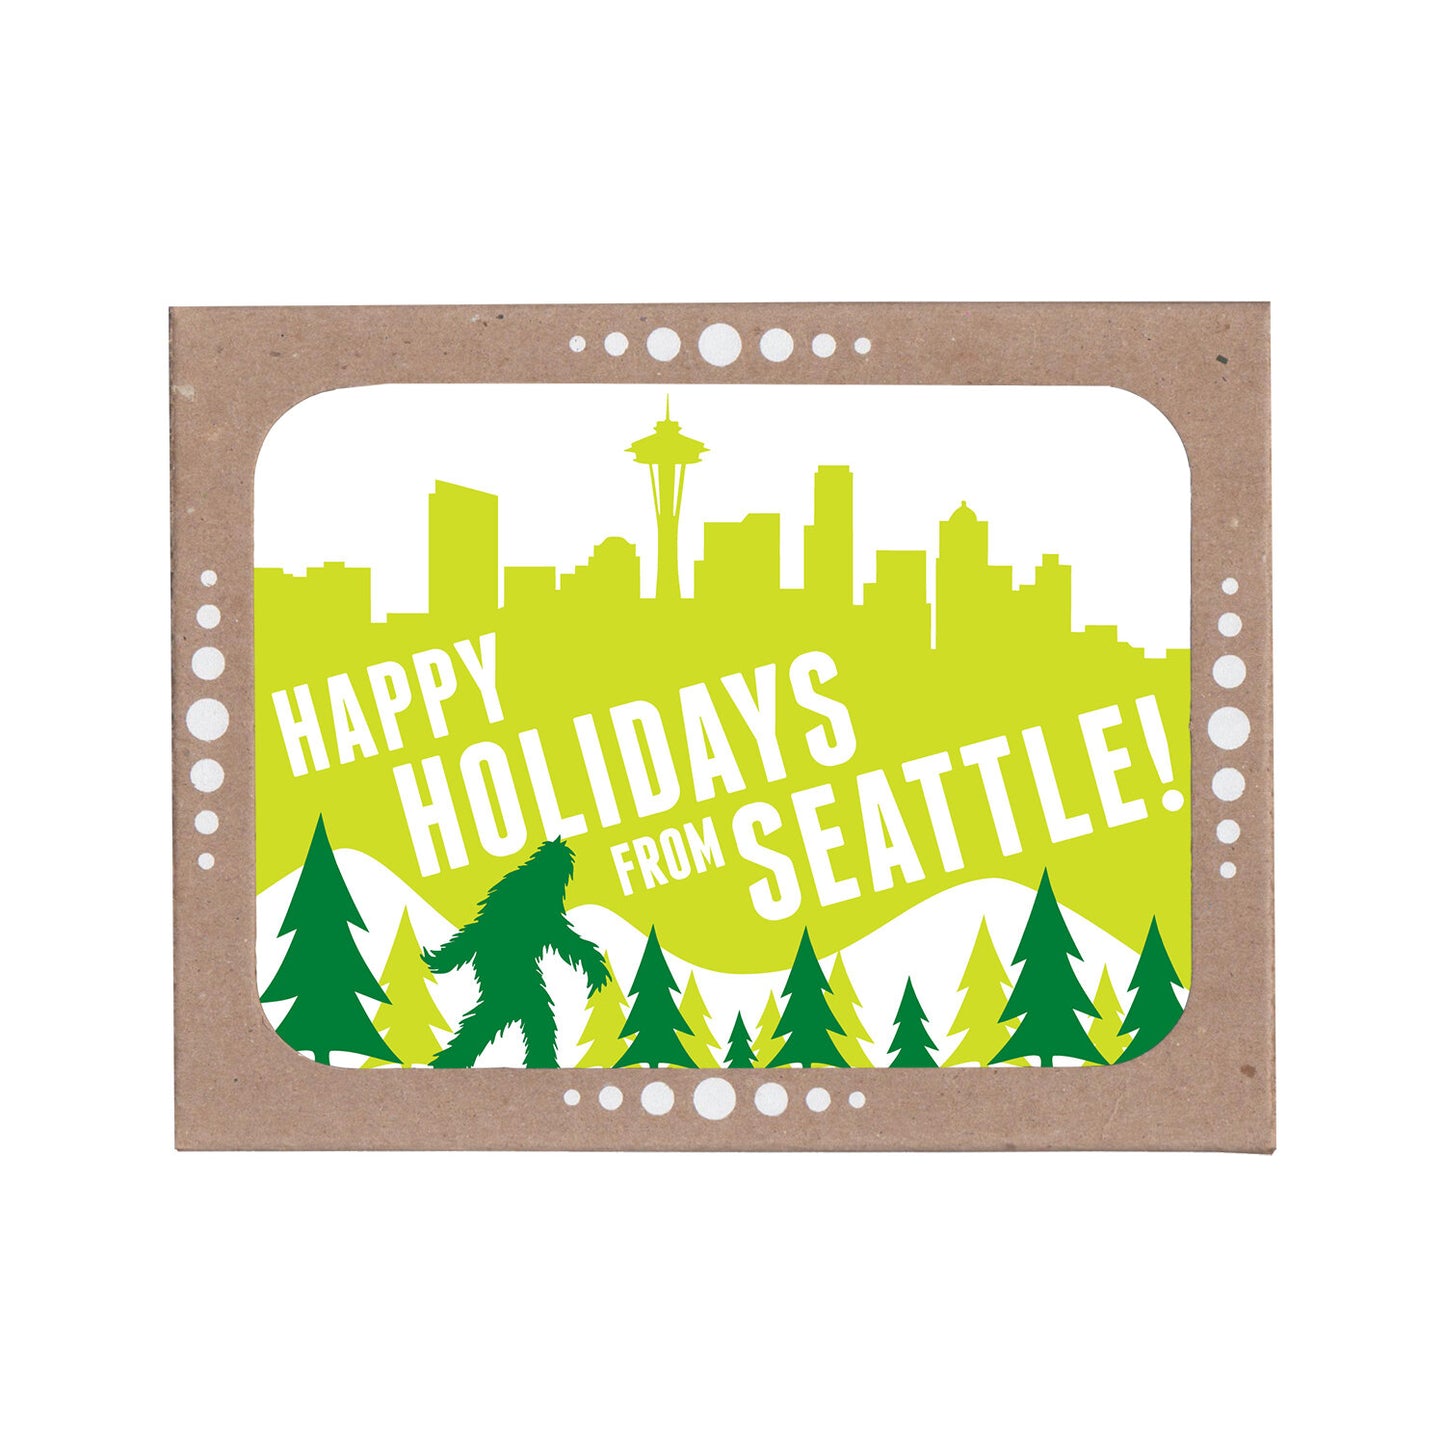 Product image for Sasquatch and Seattle Skyline Holiday Cards